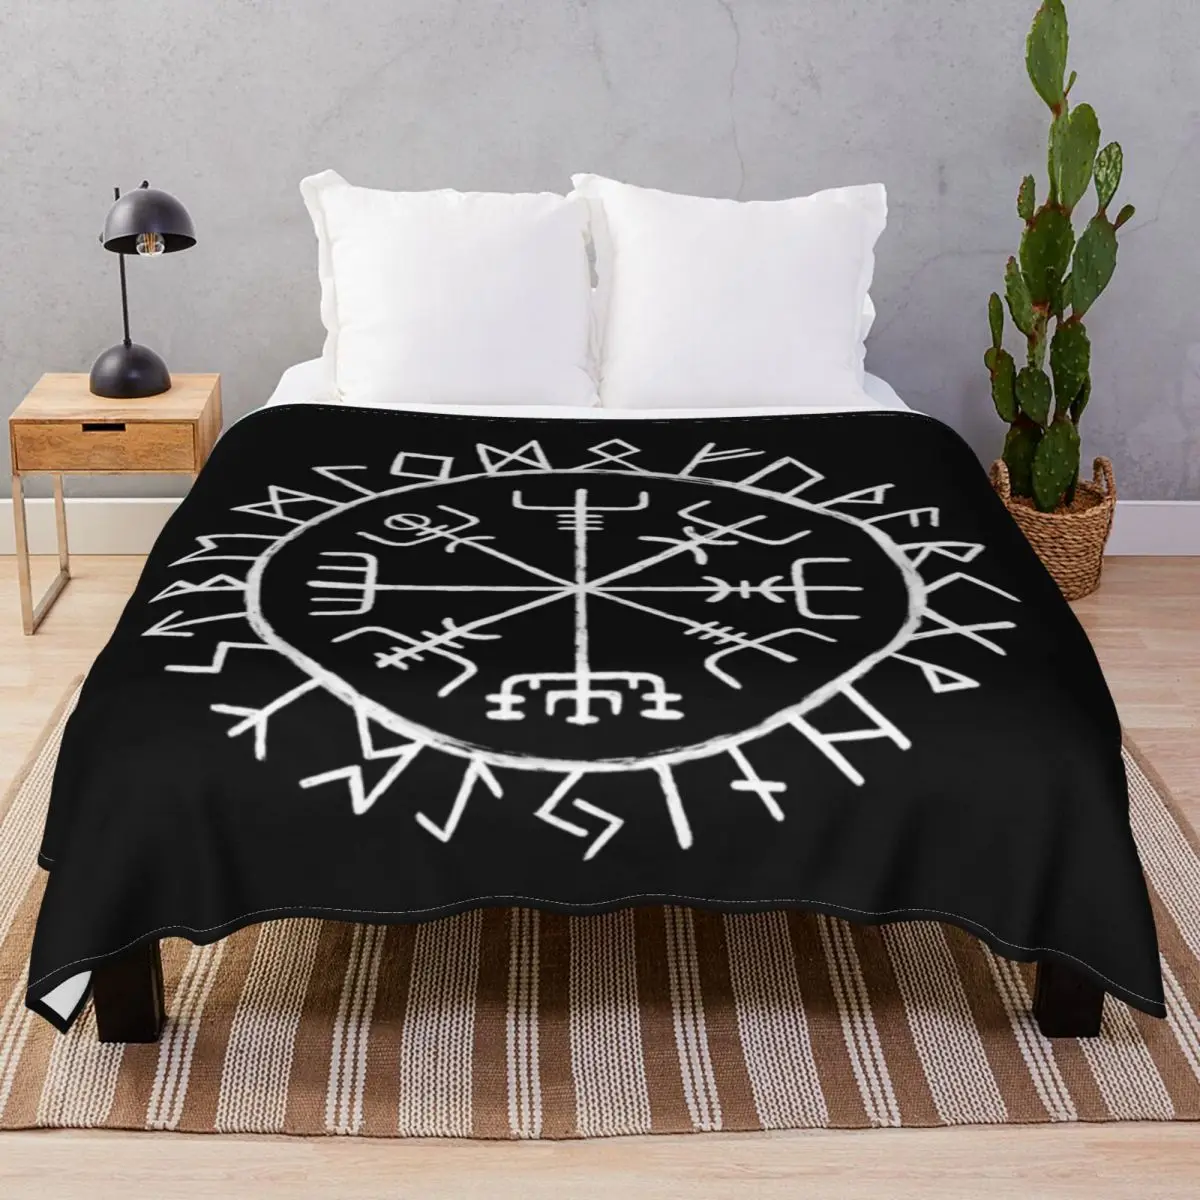 Nordic Mythology Rune Circle Blankets Fleece Spring Autumn Warm Throw Blanket for Bed Sofa Camp Office